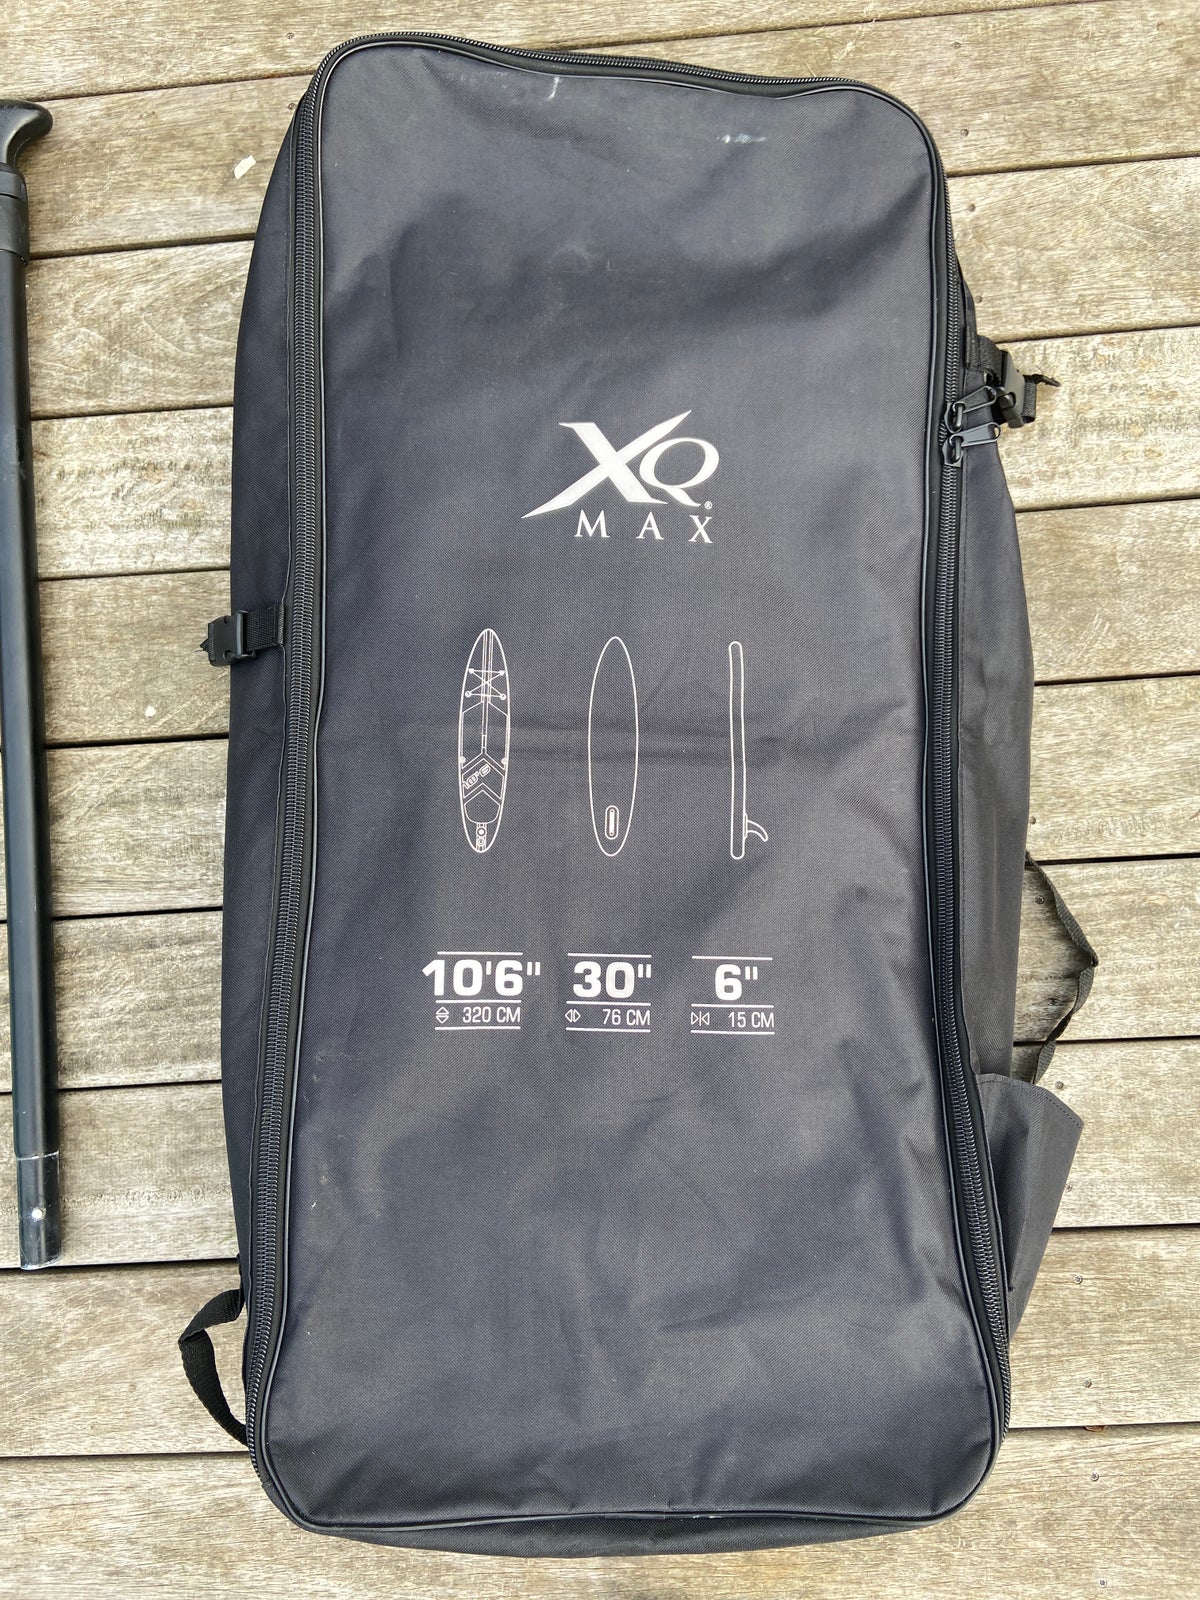 SUP stand-up paddleboard, XQ Max